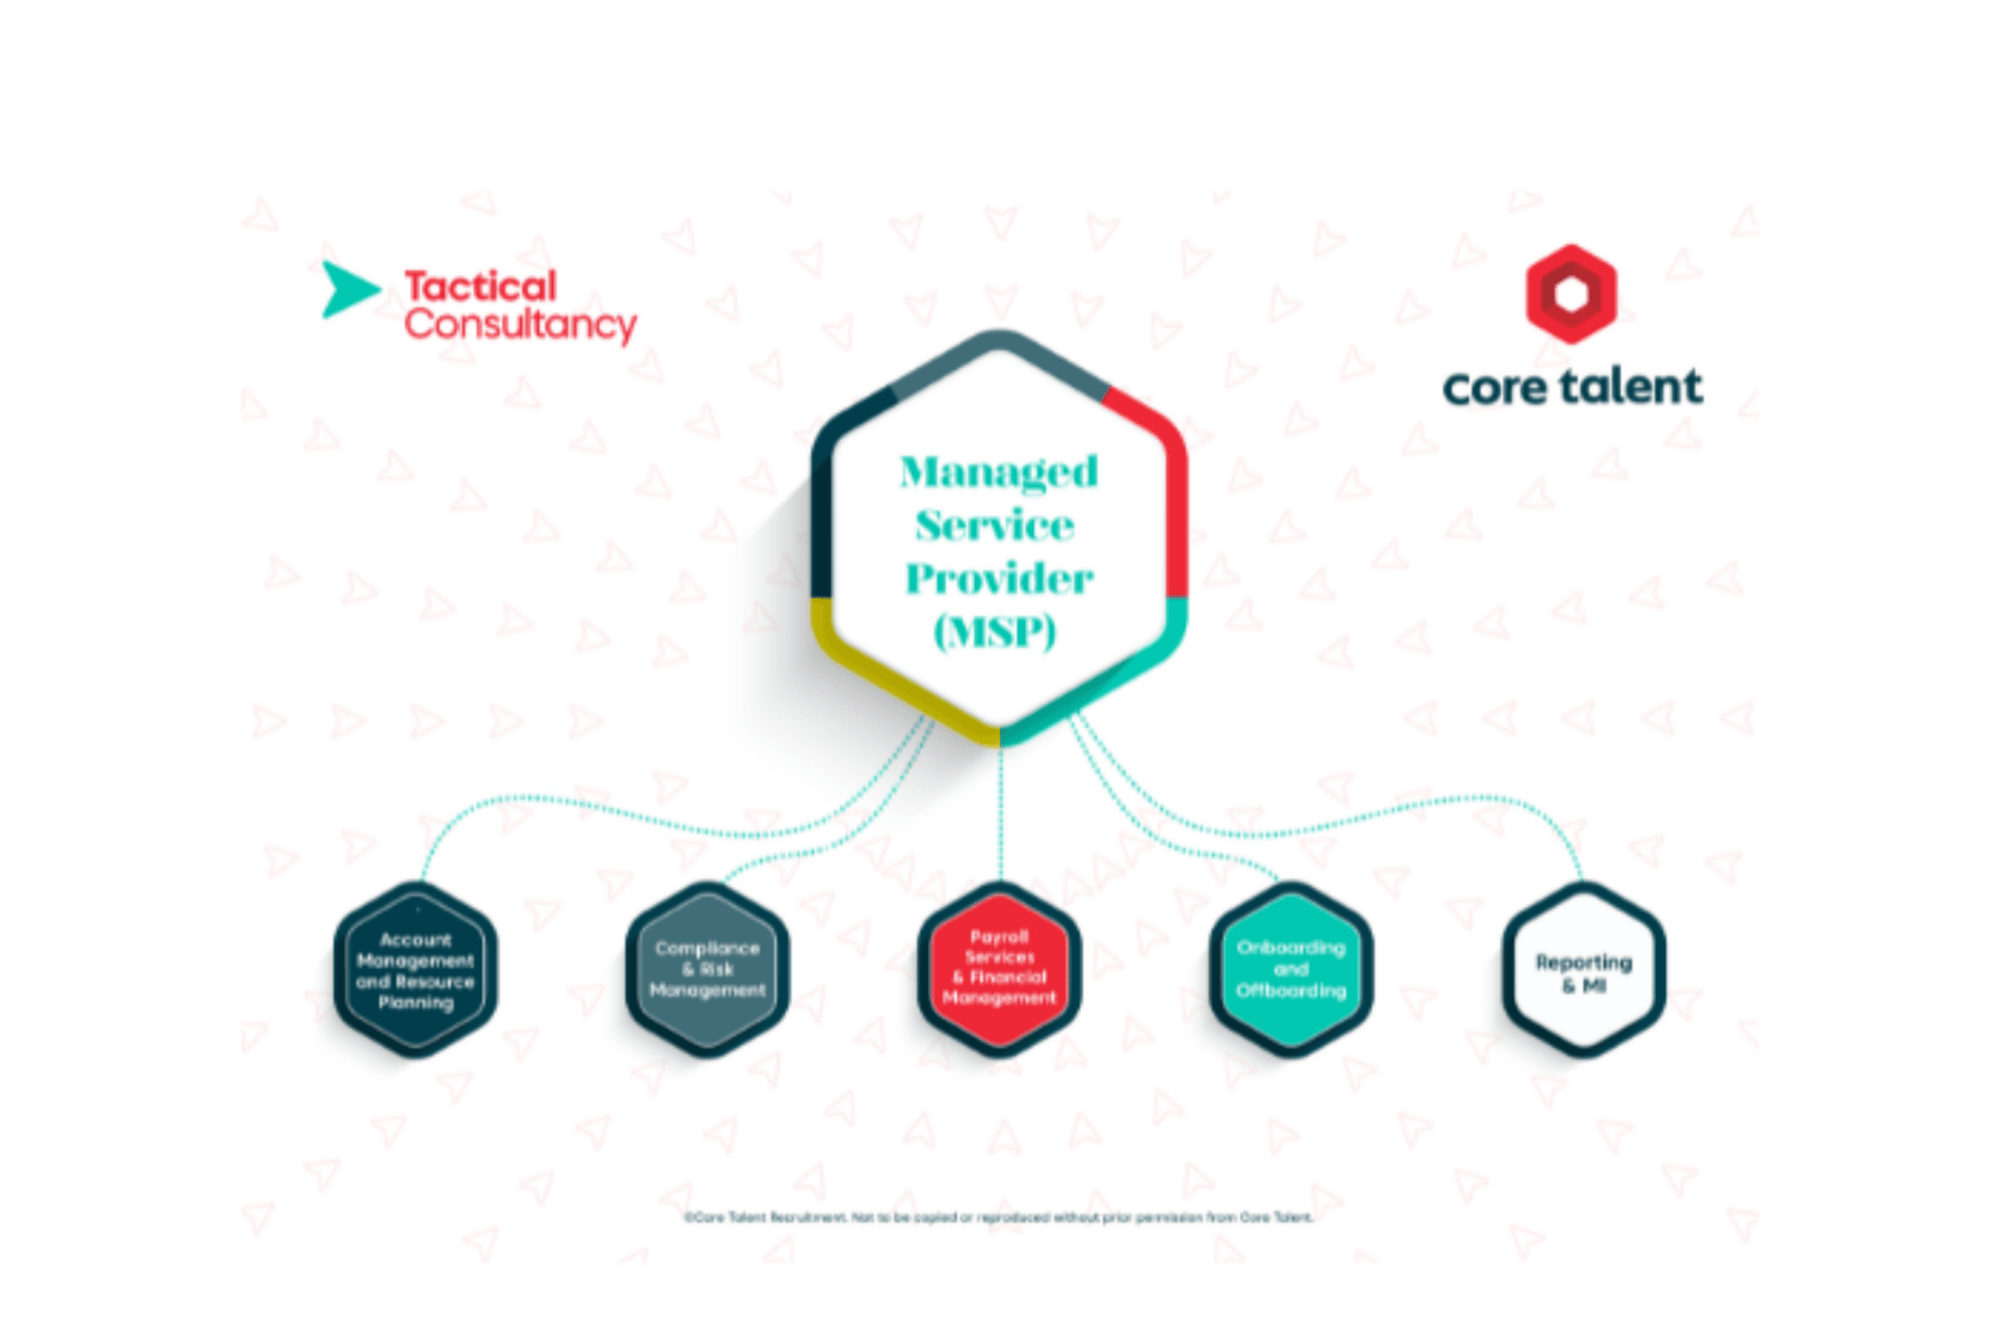 Consultancy Services Core Talent Overview